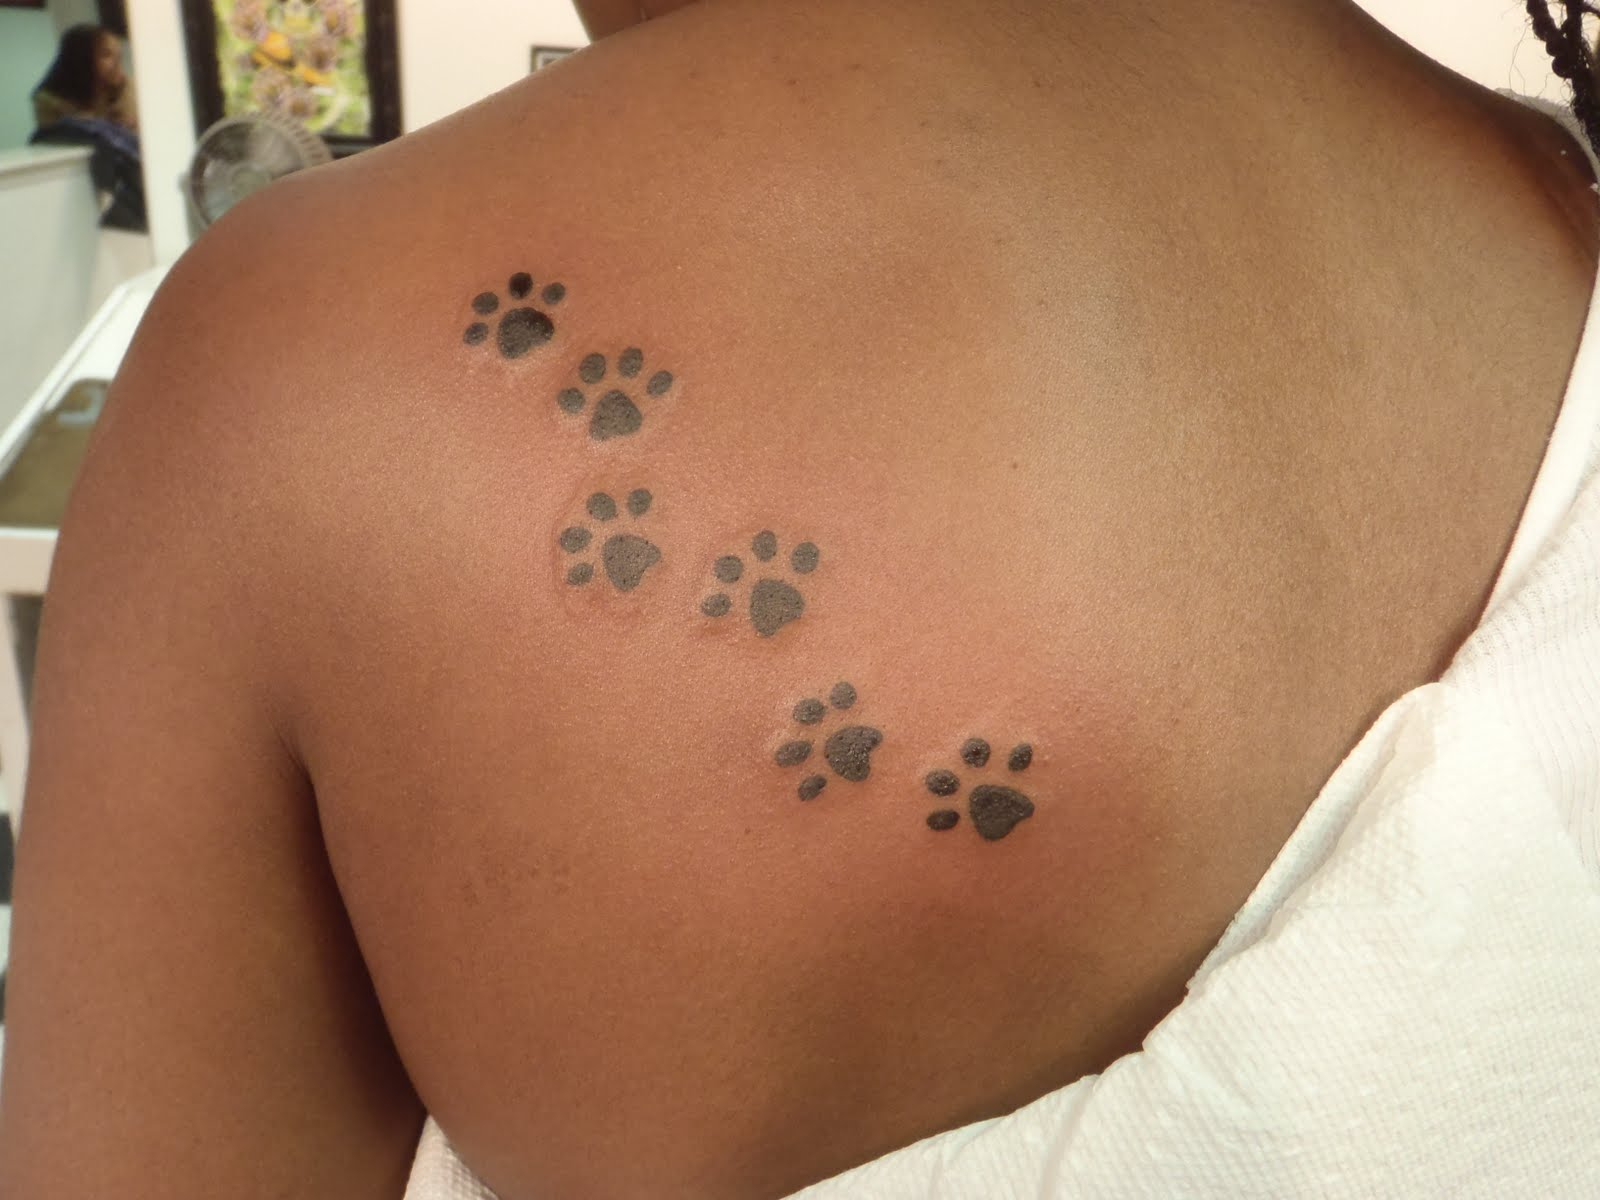 Paw Print Tattoos Designs Ideas And Meaning Tattoos For You inside sizing 1600 X 1200